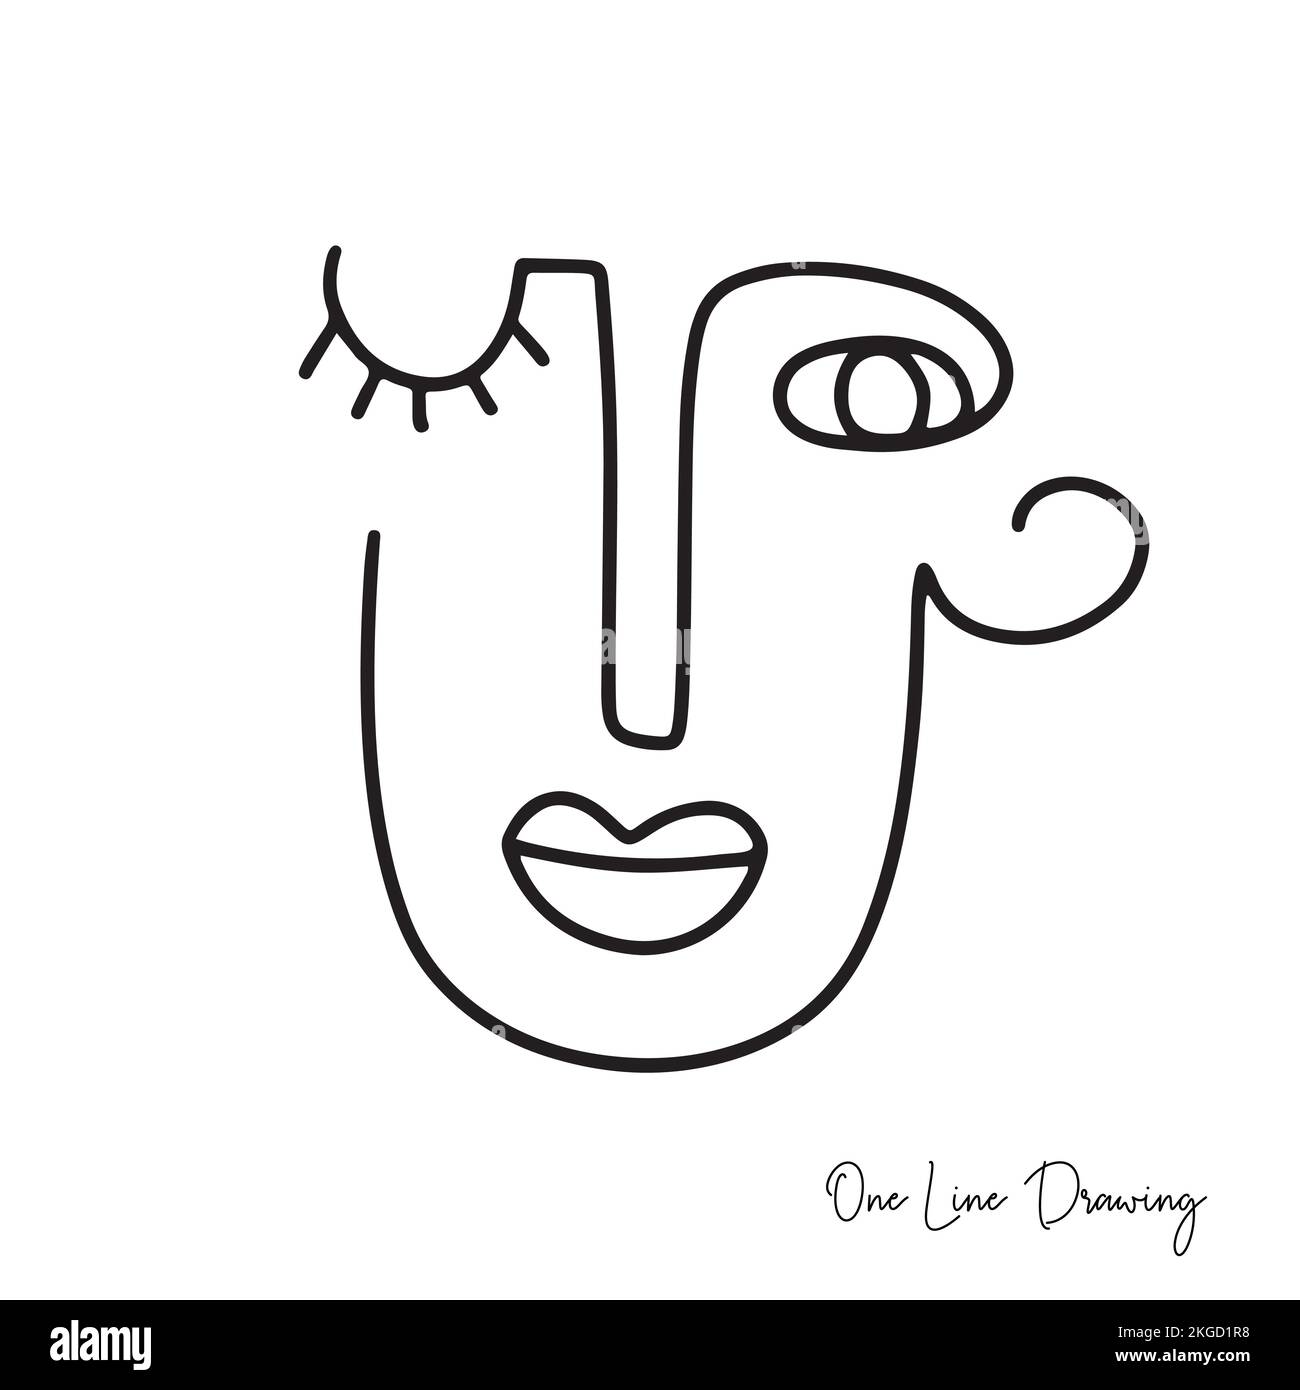 Fashion Cubism One line drawing human face Stock Vector